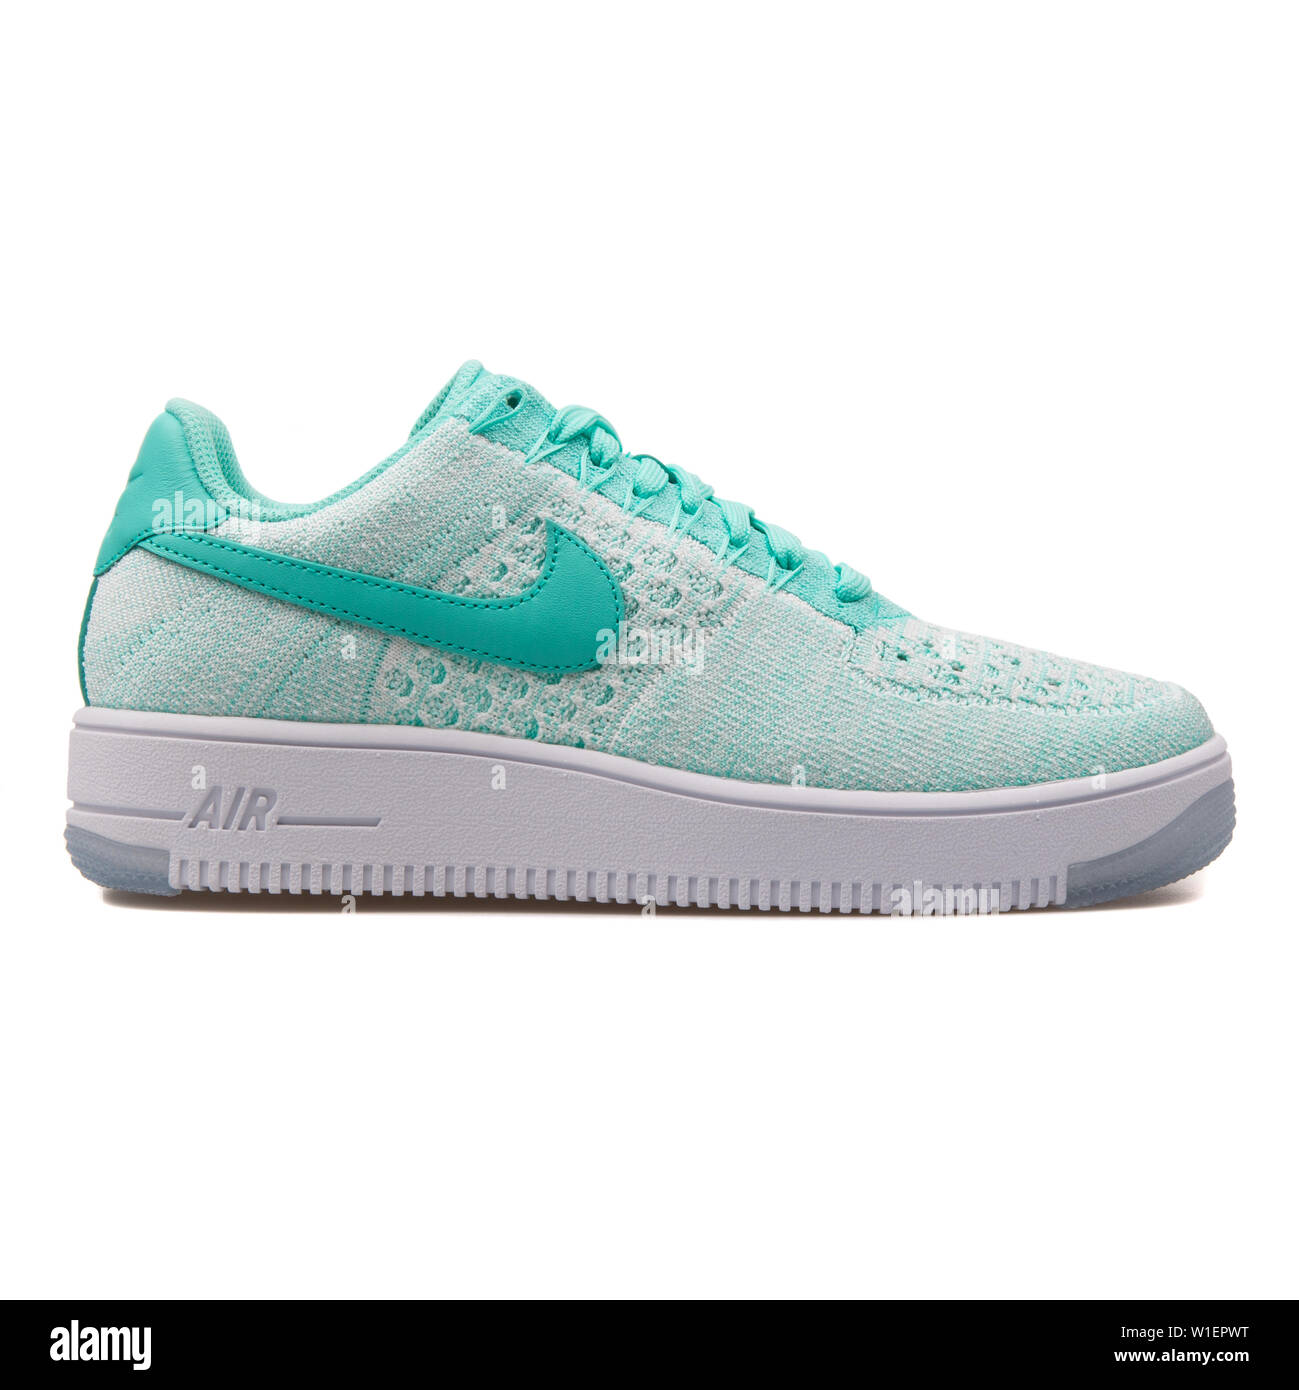 VIENNA, AUSTRIA - AUGUST 10, 2017: Nike Air Force 1 Flyknit Low turquoise  and white sneaker on white background Stock Photo - Alamy